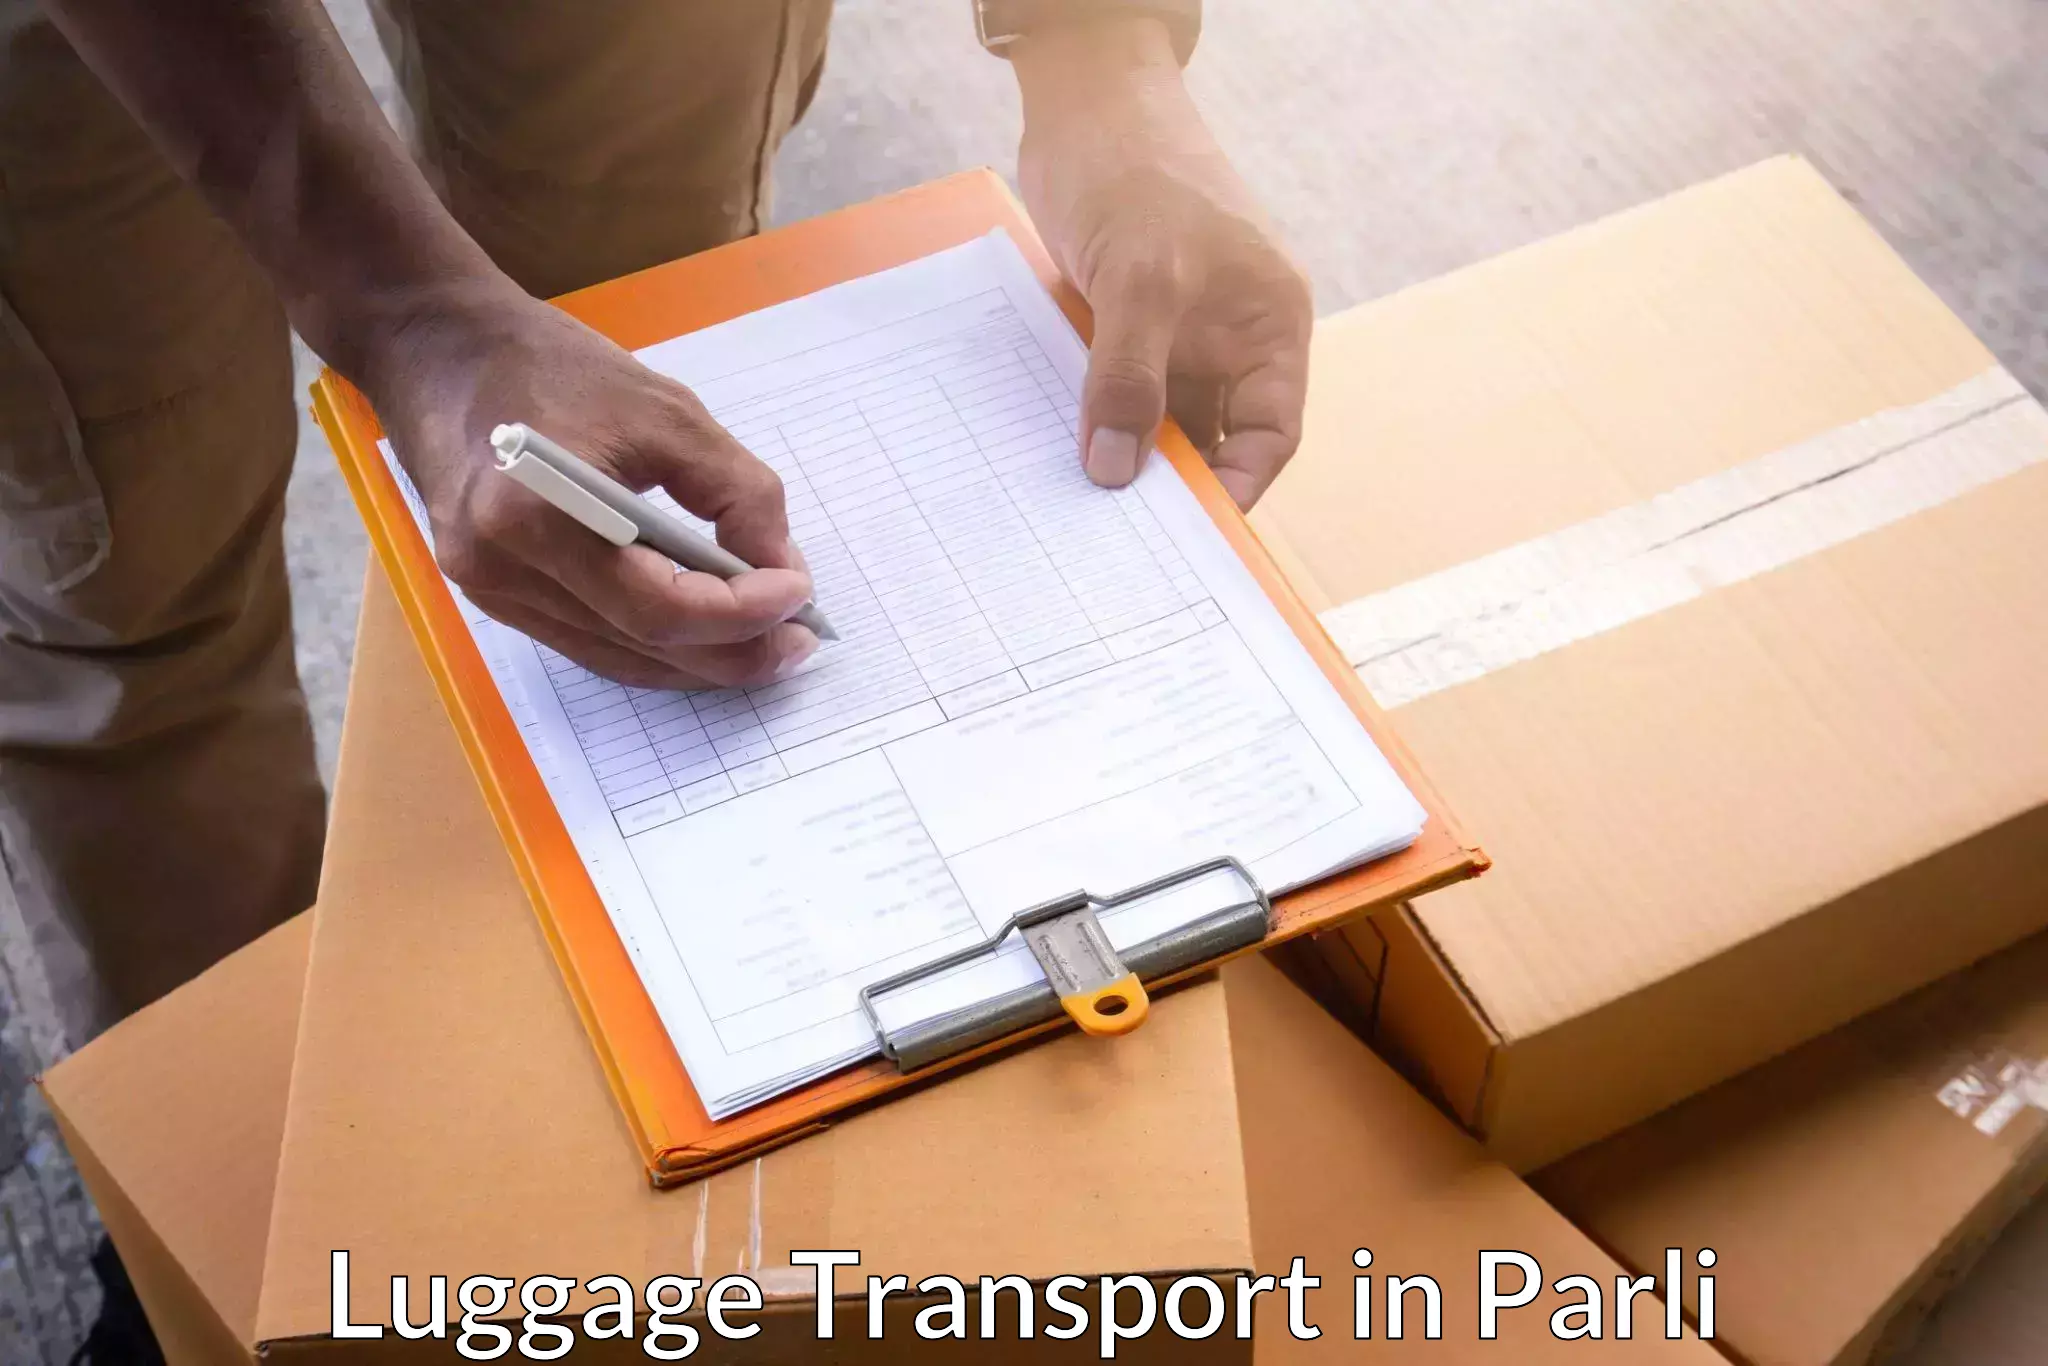 Luggage shipping planner in Parli